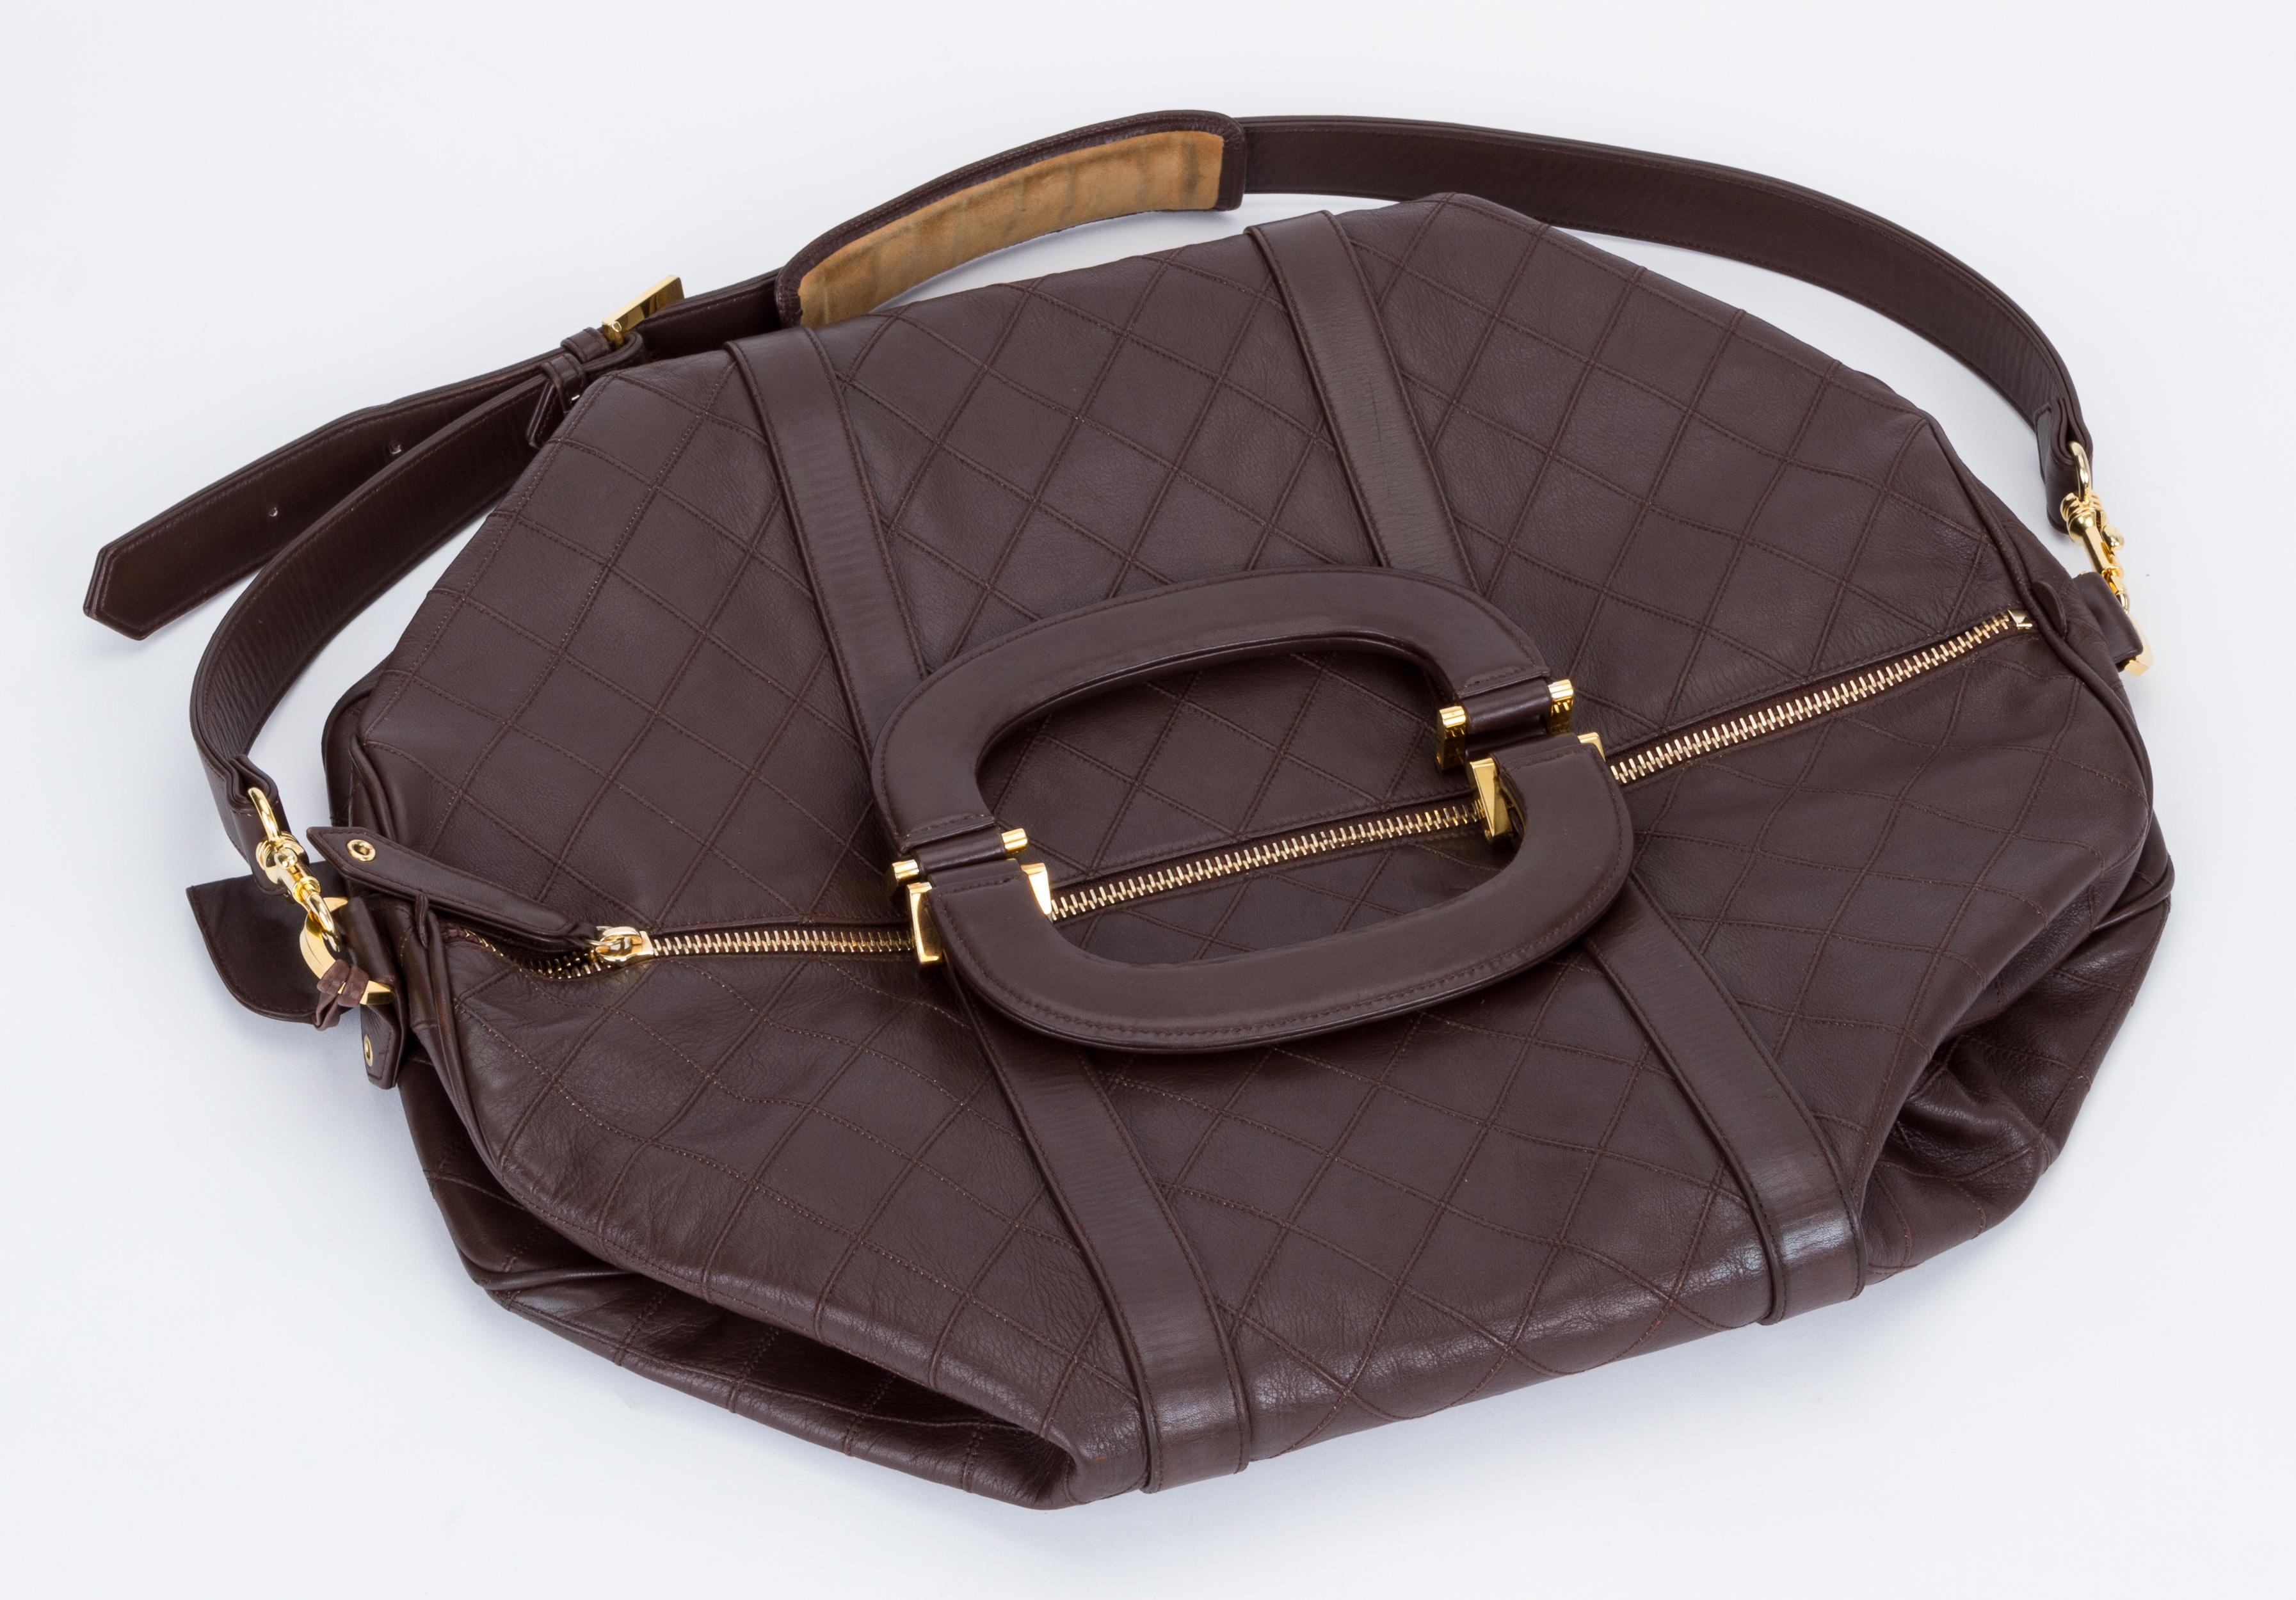 Black Chanel Vintage Brown Diamond Quilted Duffle Bag, 1980s  For Sale